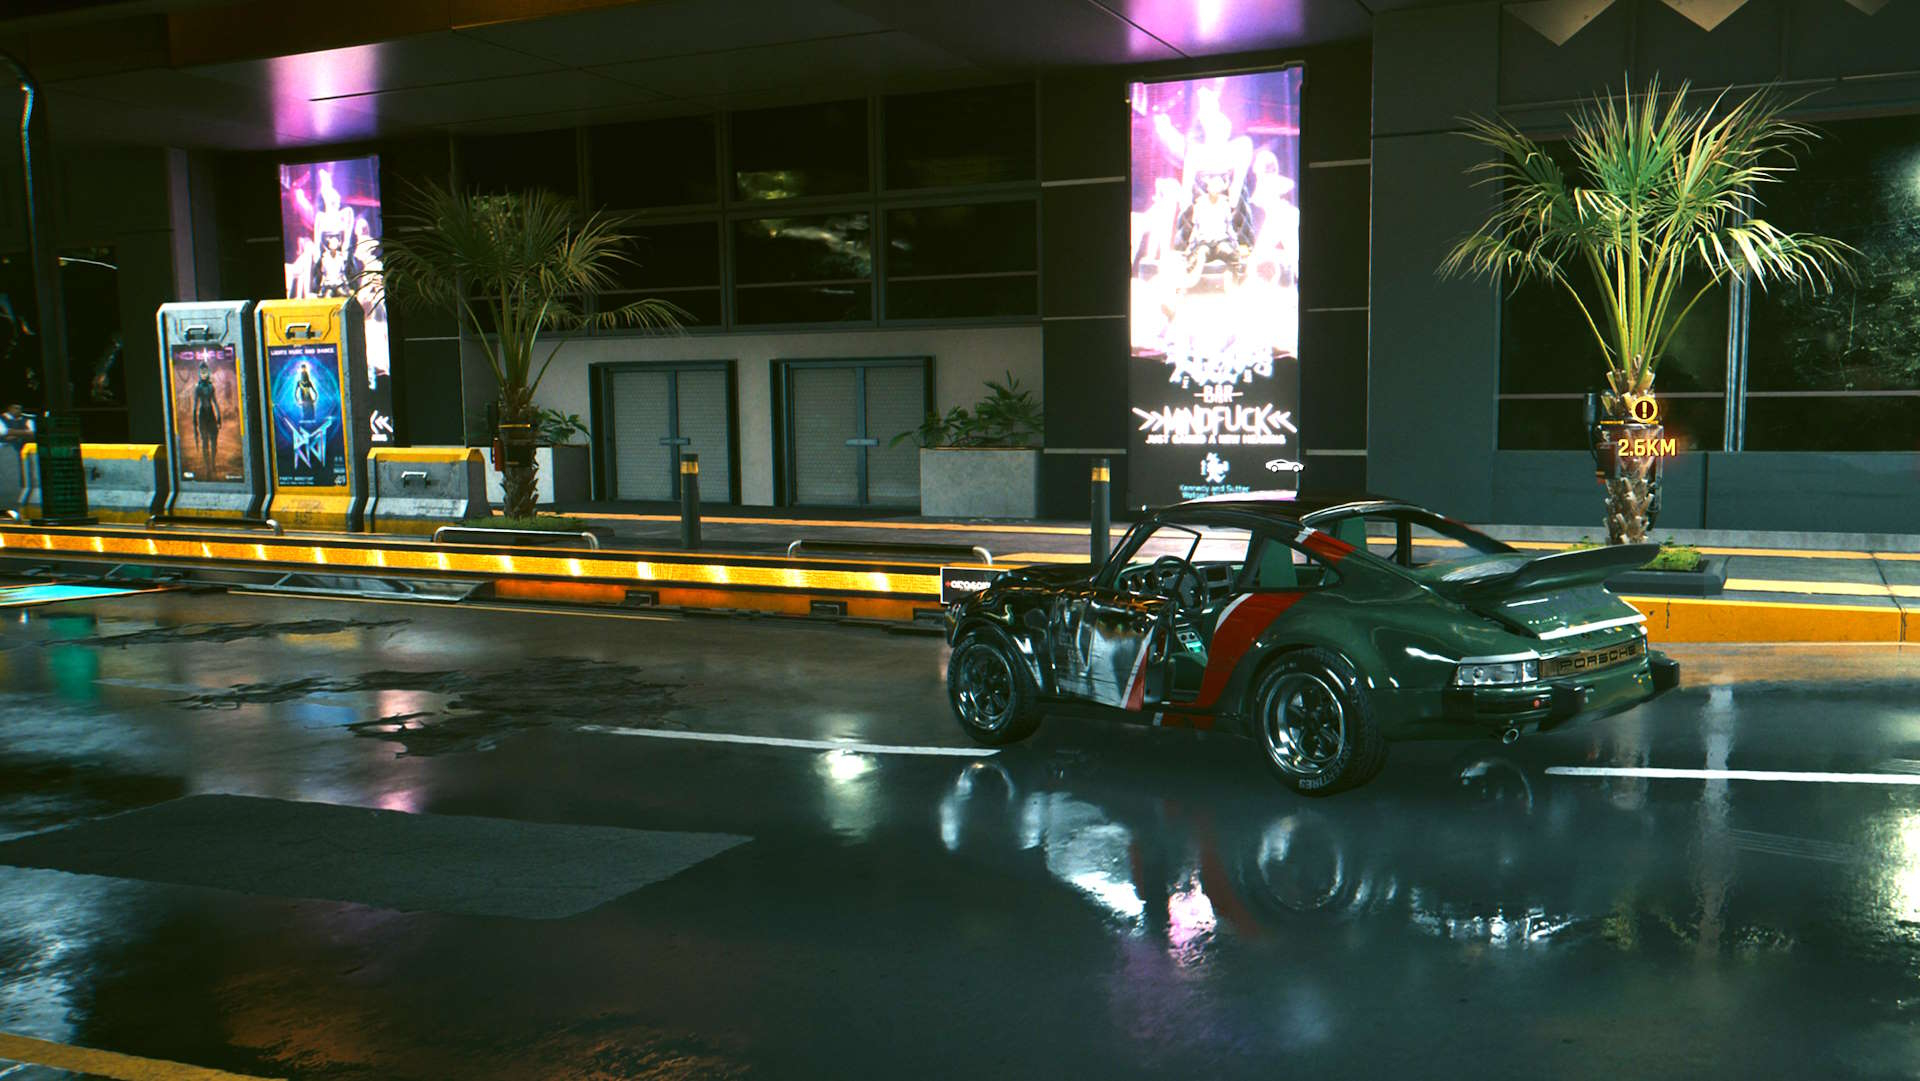  You can already hack Ray Reconstruction into Cyberpunk 2077 without the path tracing limitation, but Nvidia promises to open it up officially soon 